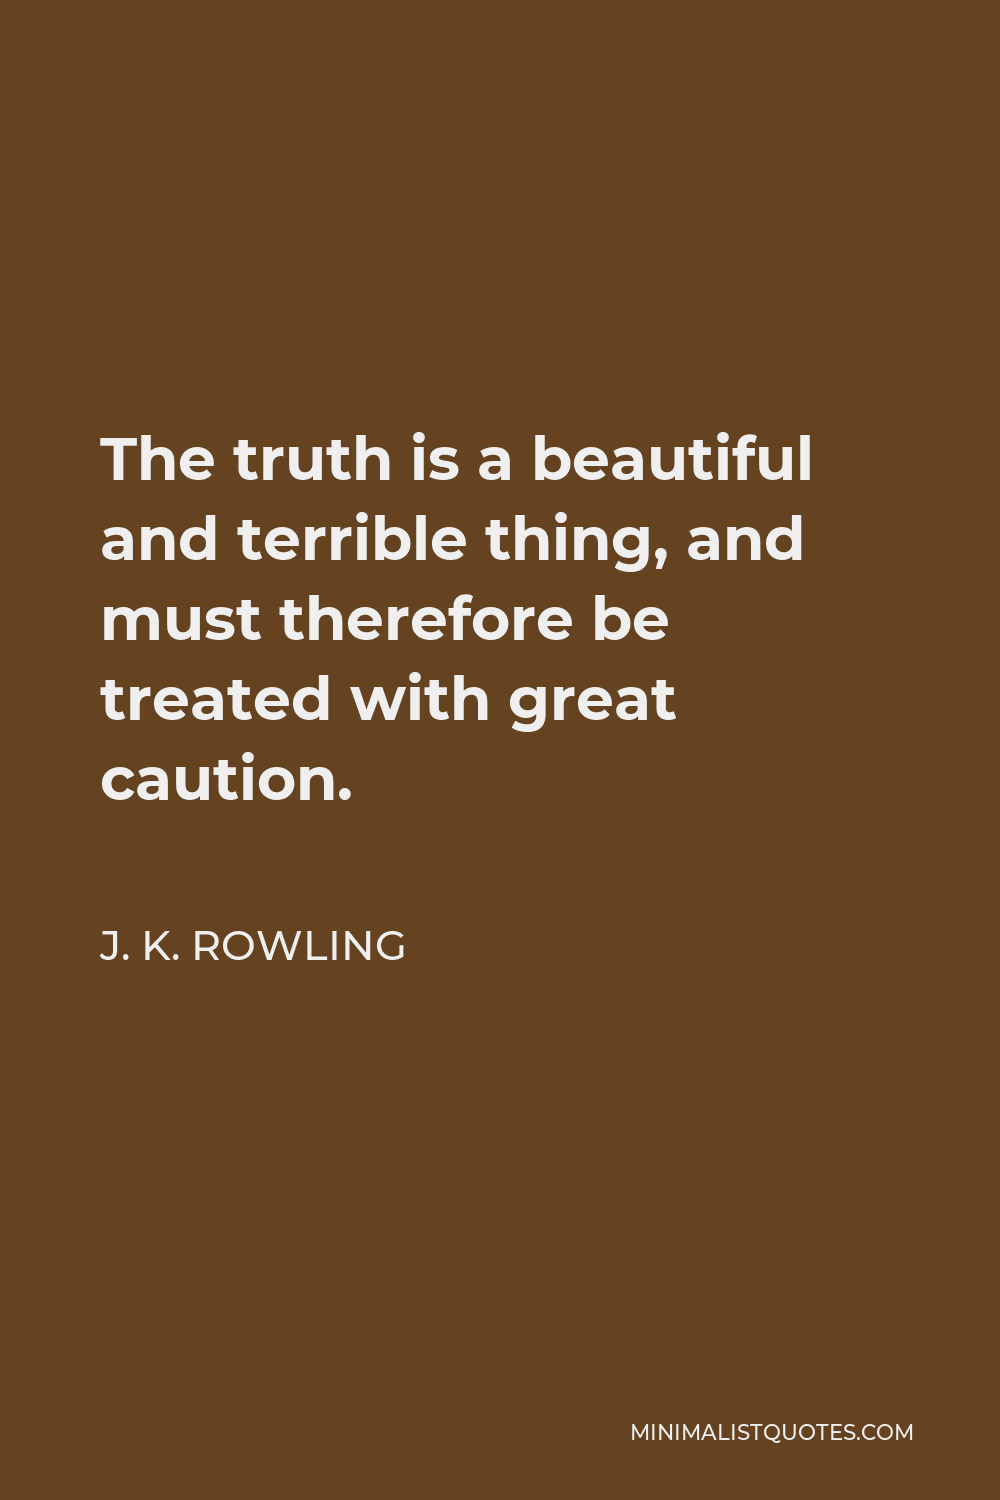 J. K. Rowling Quote - The truth is a beautiful and terrible thing, and must therefore be treated with great caution.